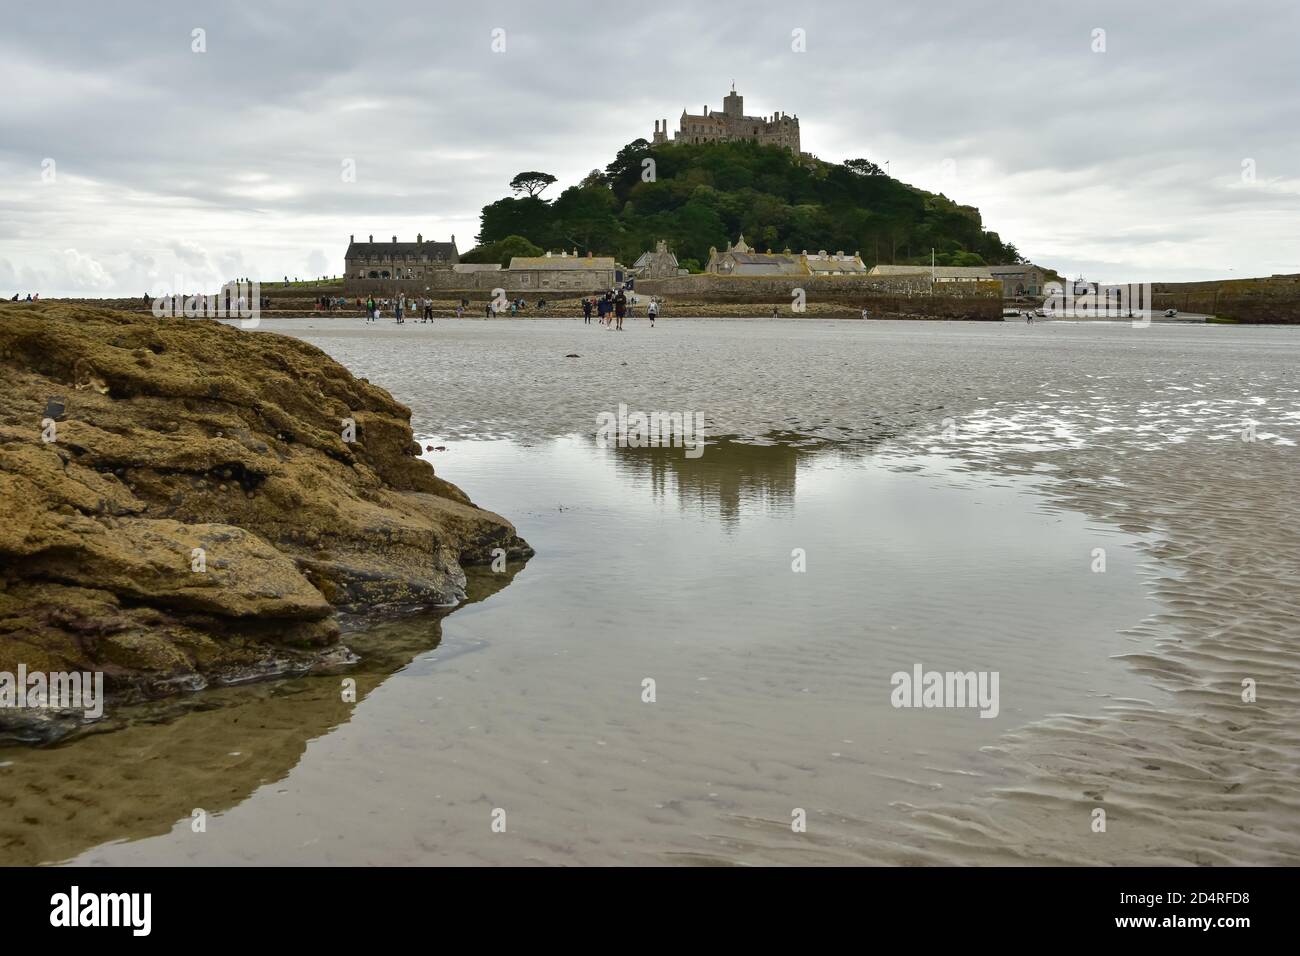 St Michael's Mount in Cornwall connecting to Marazion with a causeway which submerges under the water at high tide Stock Photo